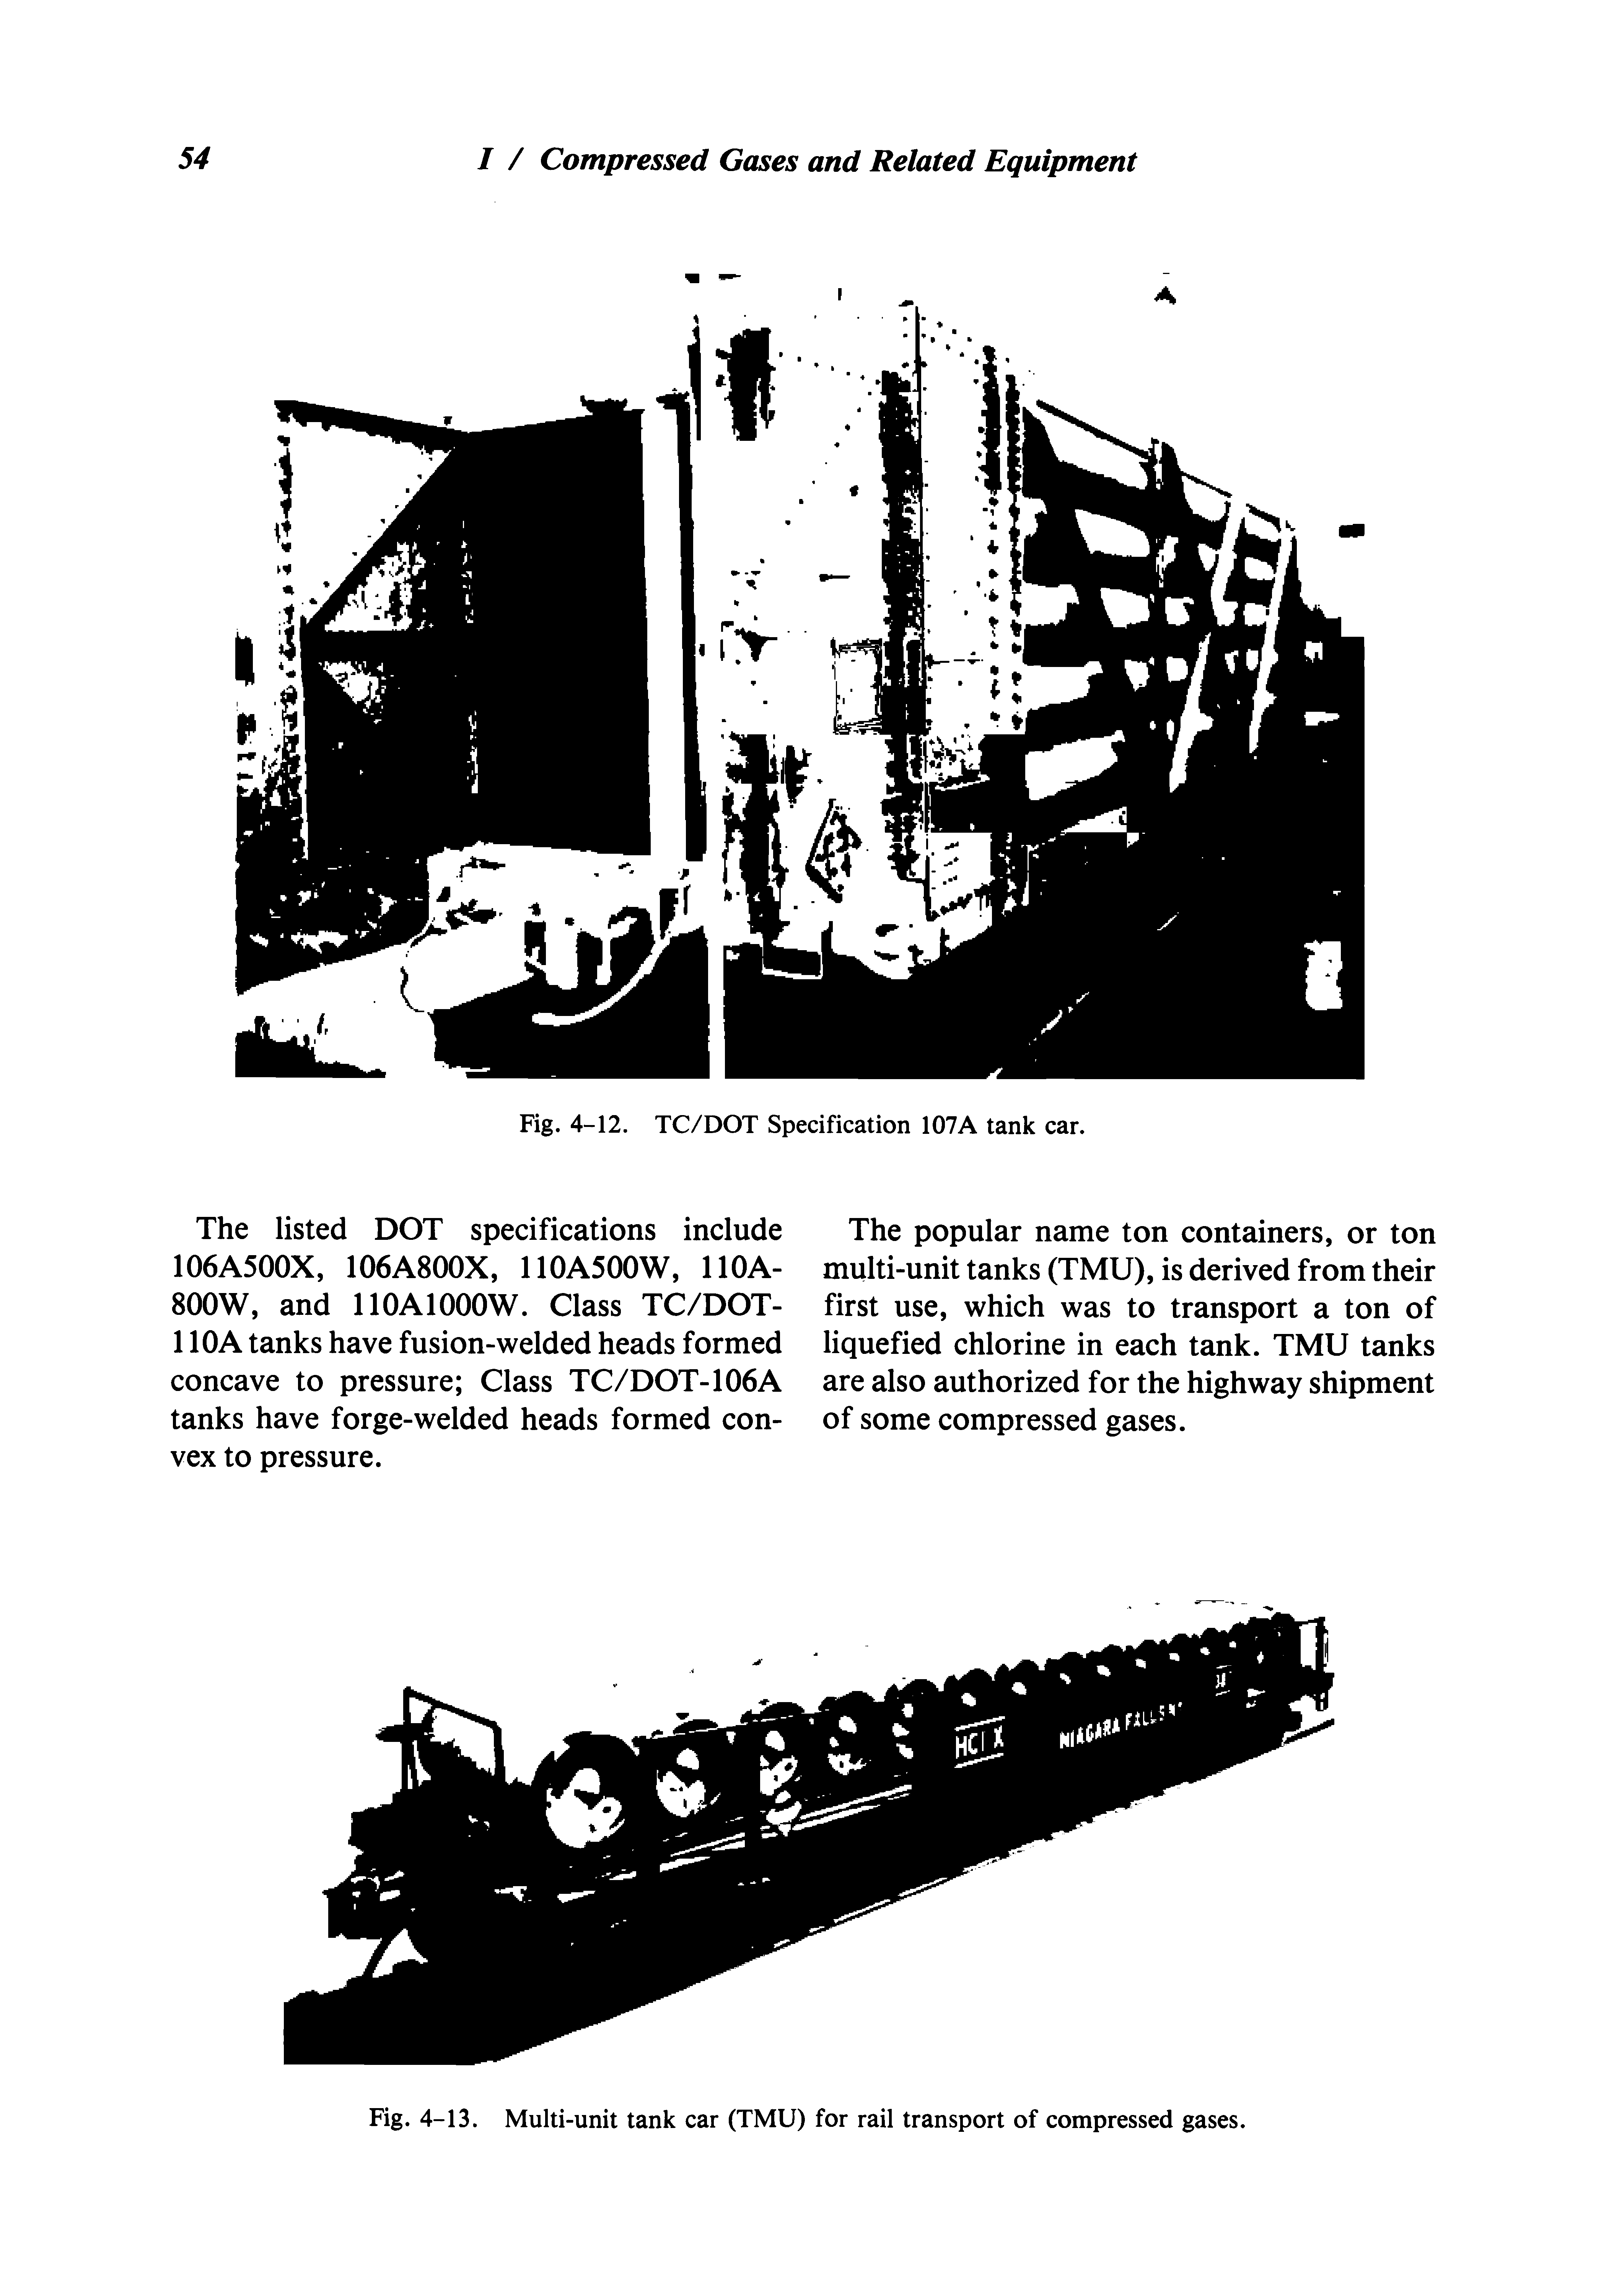 Fig. 4-13. Multi-unit tank car (TMU) for rail transport of compressed gases.